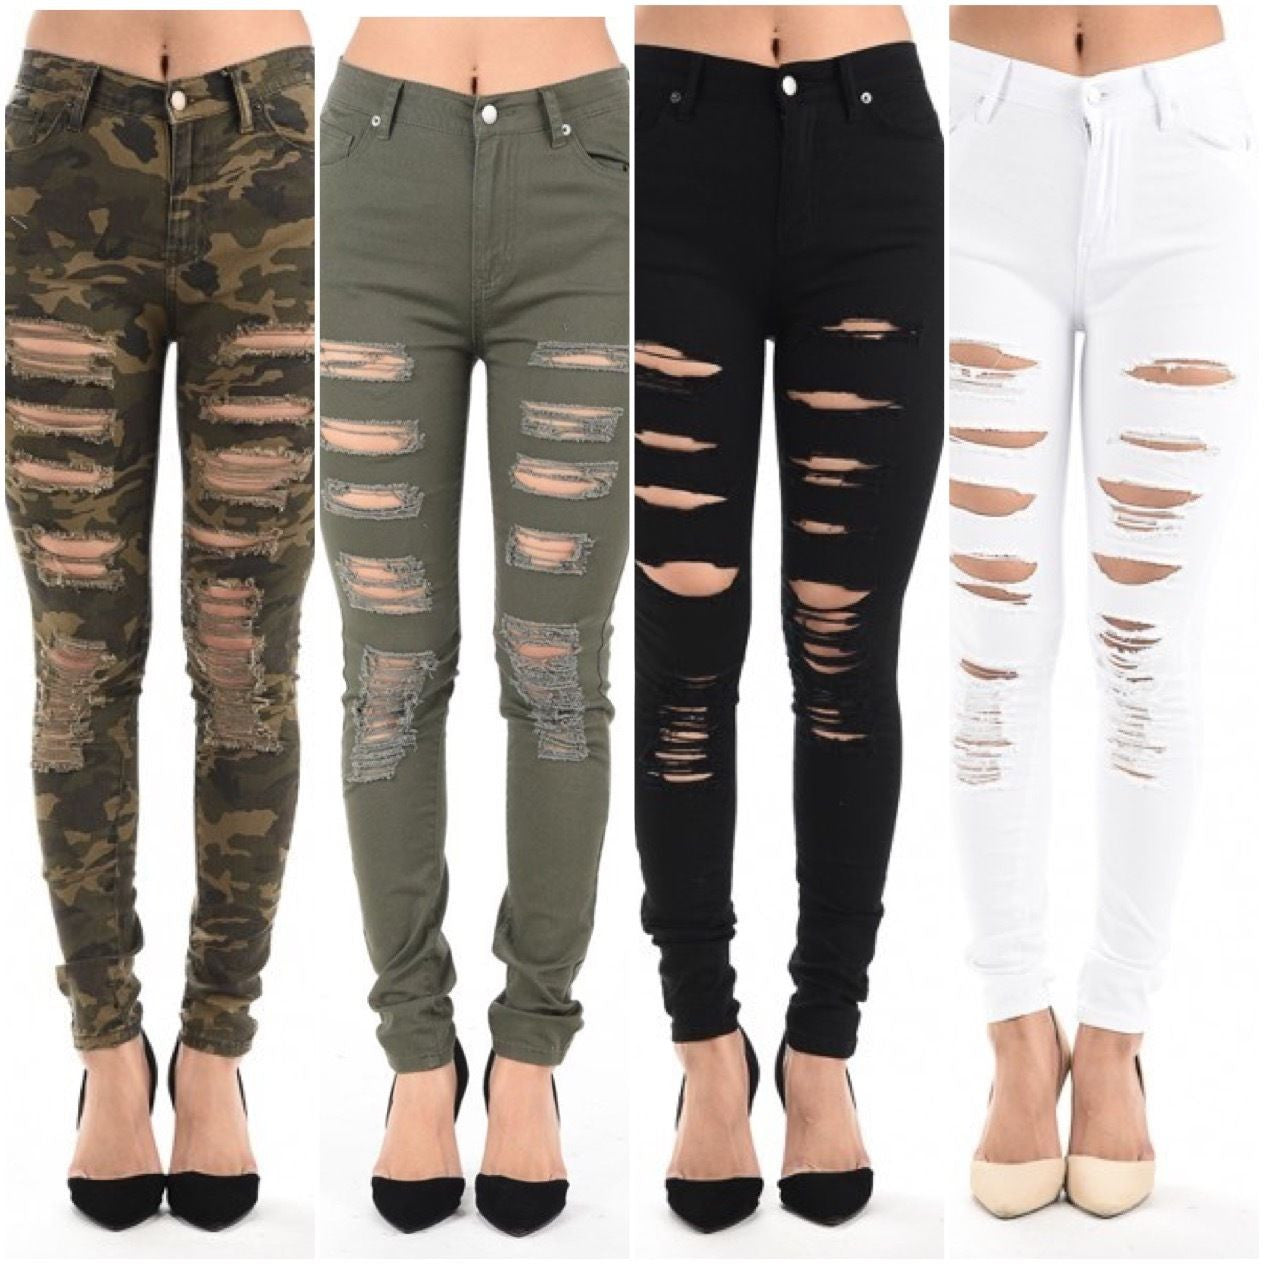 Plus High Waist Pants Ripped Destroyed Skinny Jeans Stretch Legging Ca ...